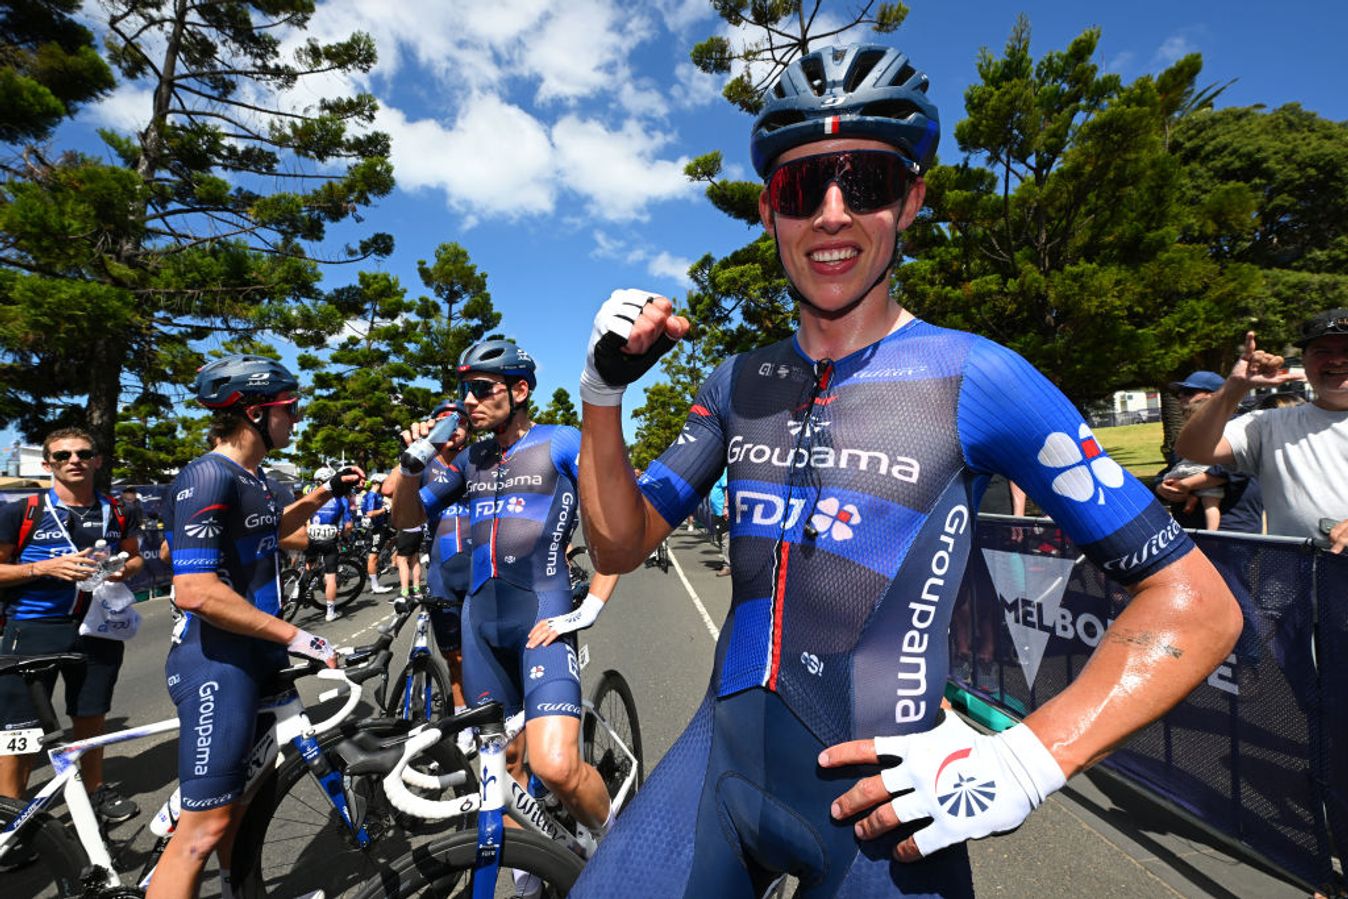 Pithie's first big win came closer to home at the Cadel Evans Great Ocean Road Race in Australia, but he's hoping for European success soon